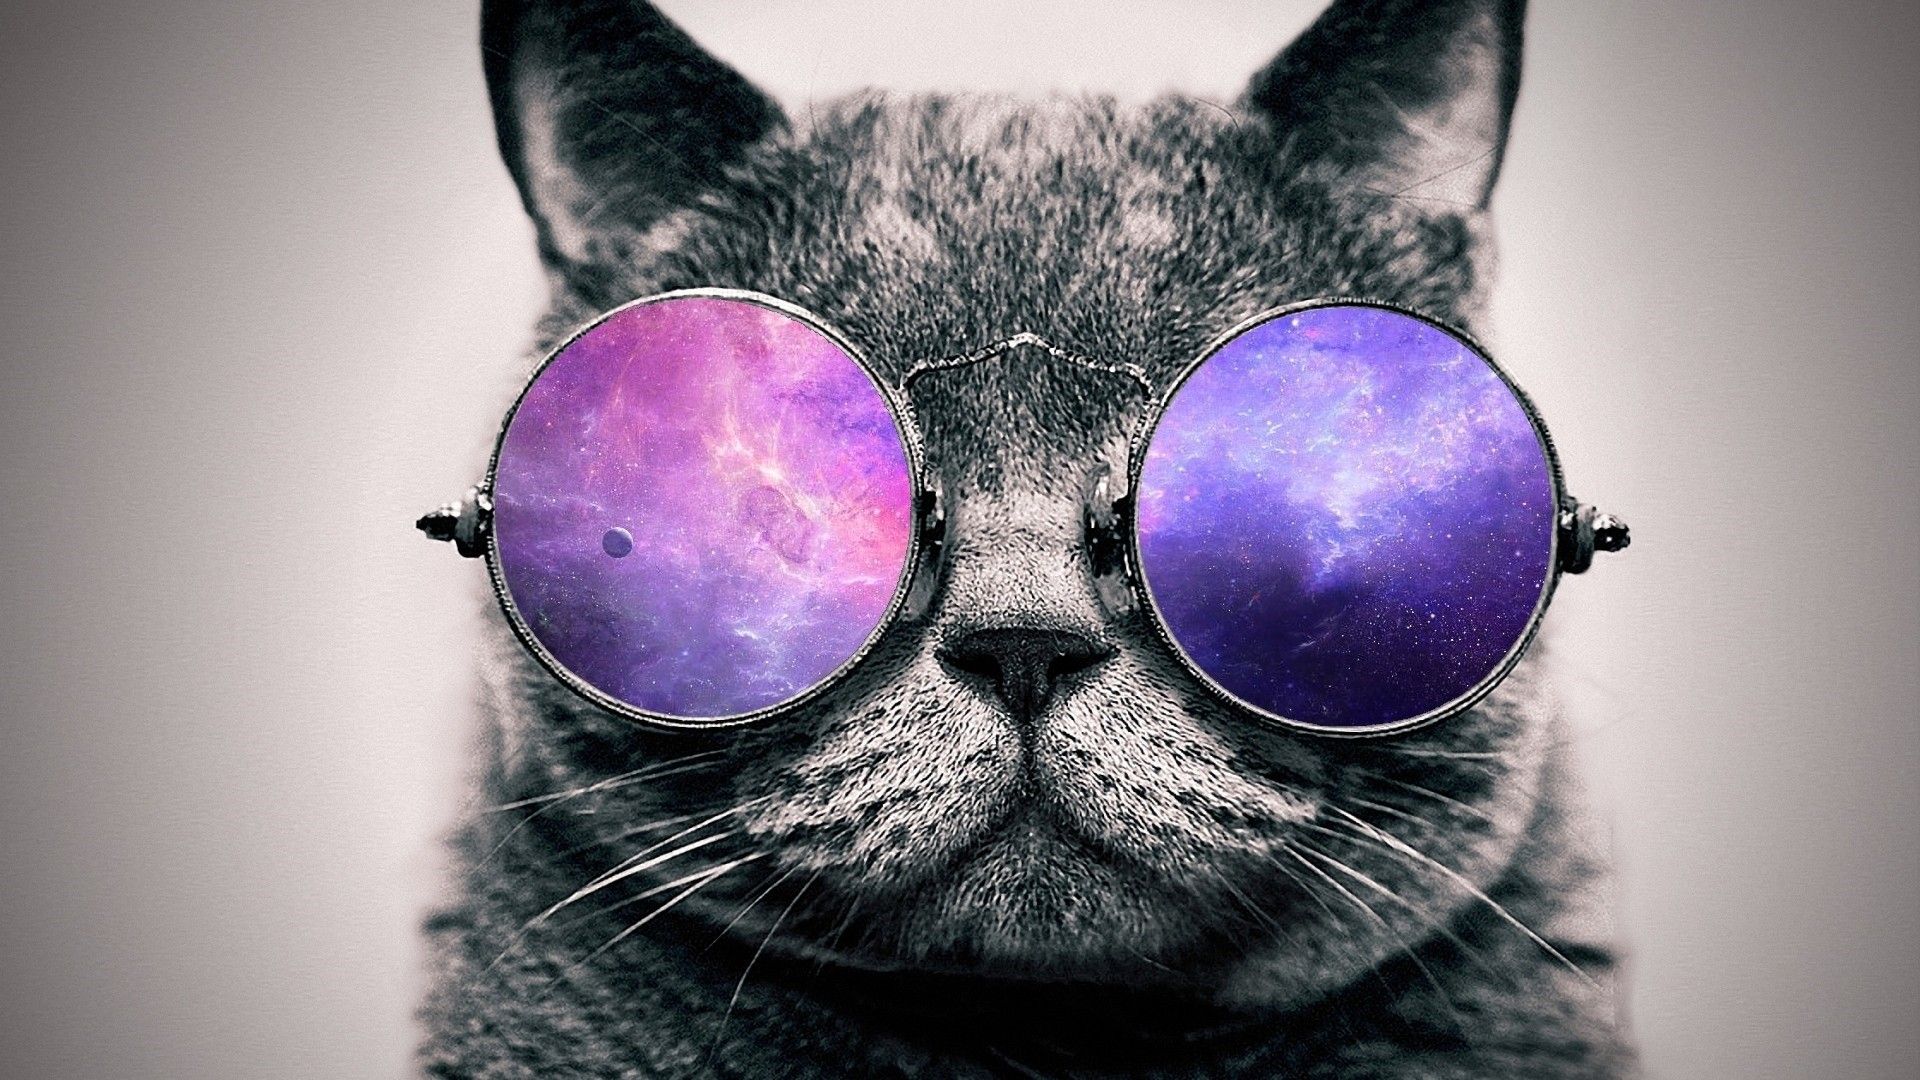 26+ Cat With Glasses
 Images